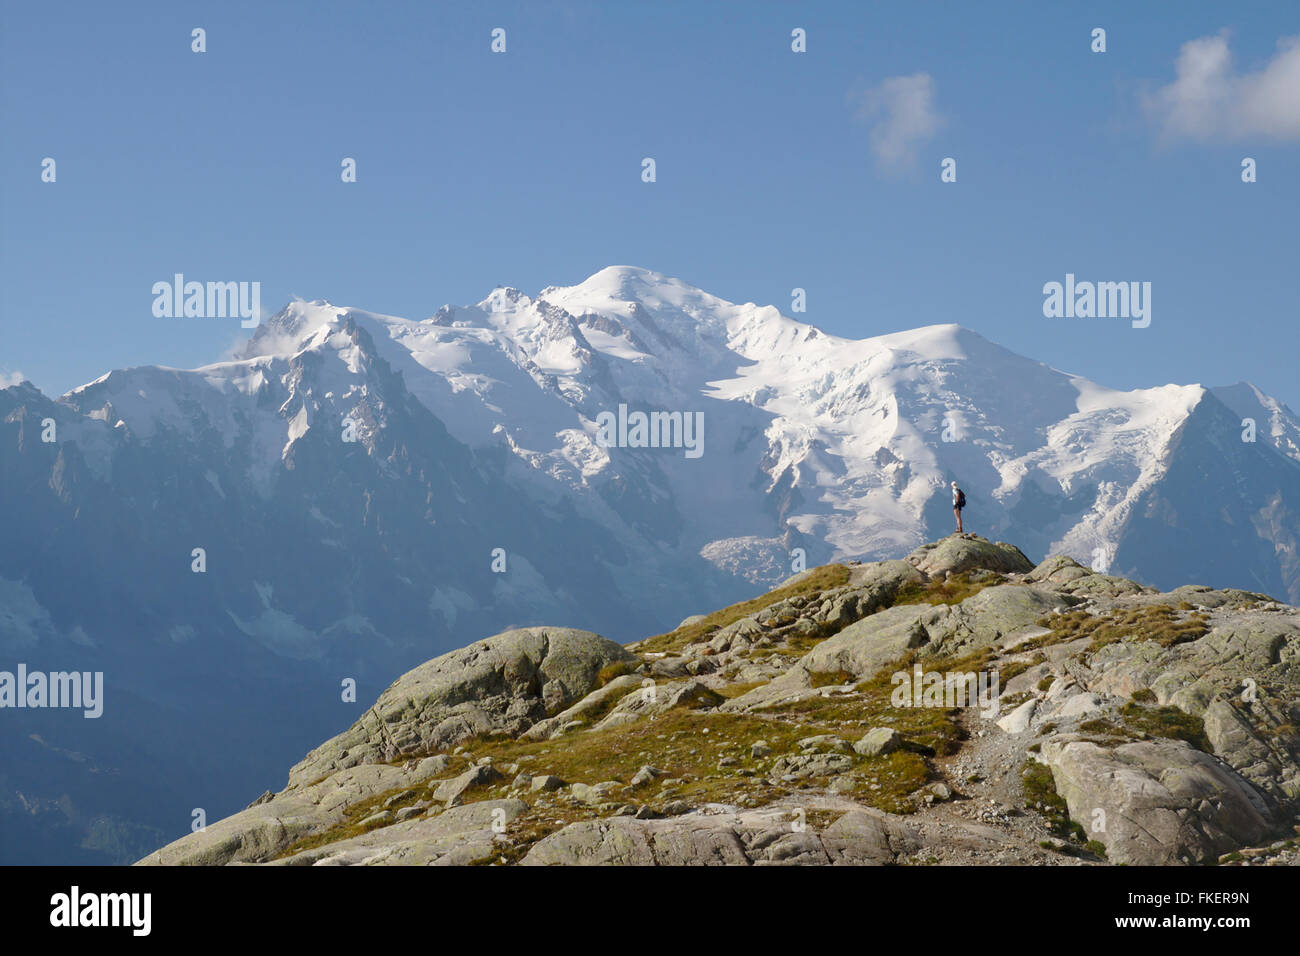 Hiker in front of Mont Blanc, near Lac Blanc, Chamonix, France Stock Photo